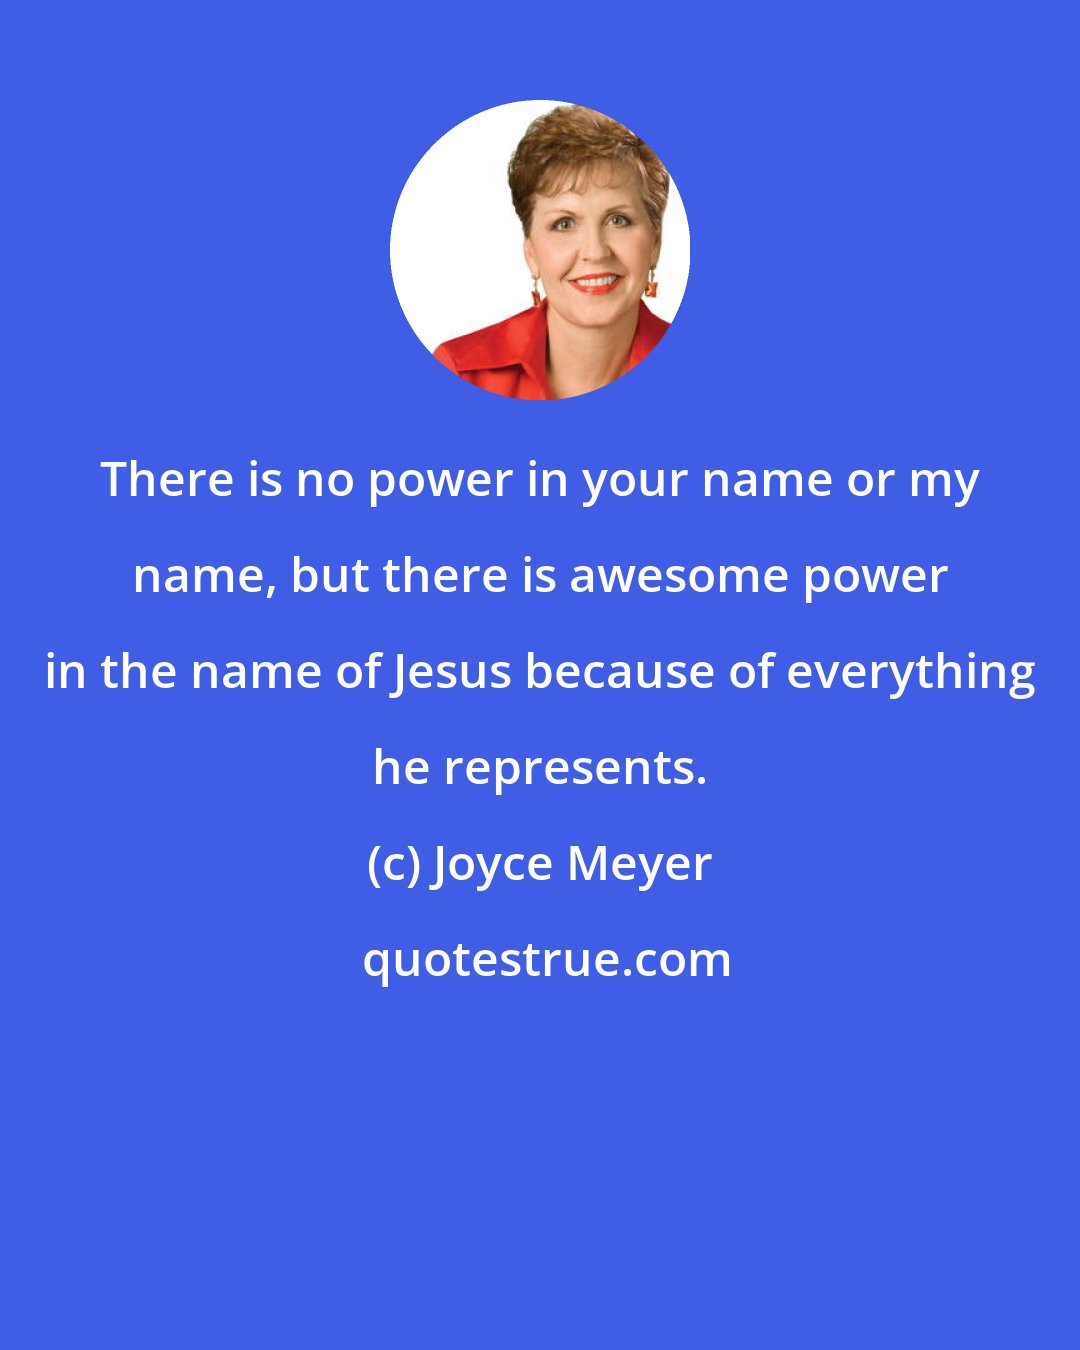 Joyce Meyer: There is no power in your name or my name, but there is awesome power in the name of Jesus because of everything he represents.